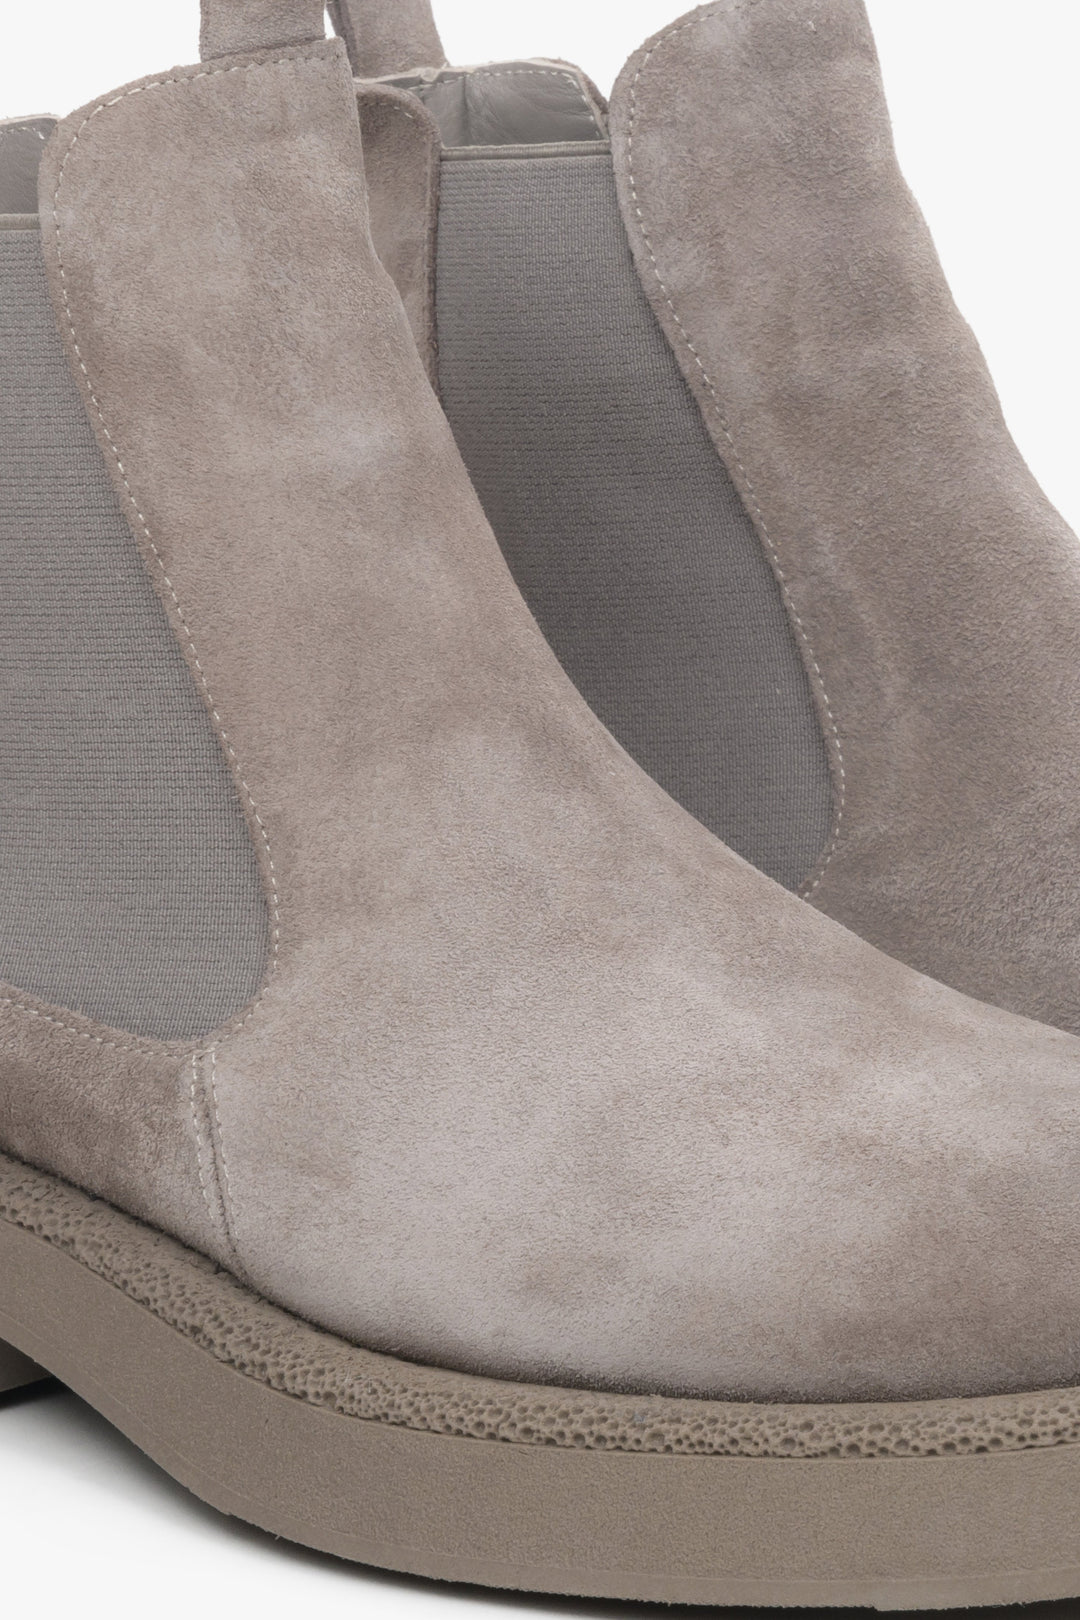 Grey suede women's Chelsea boots - a close-up on details.